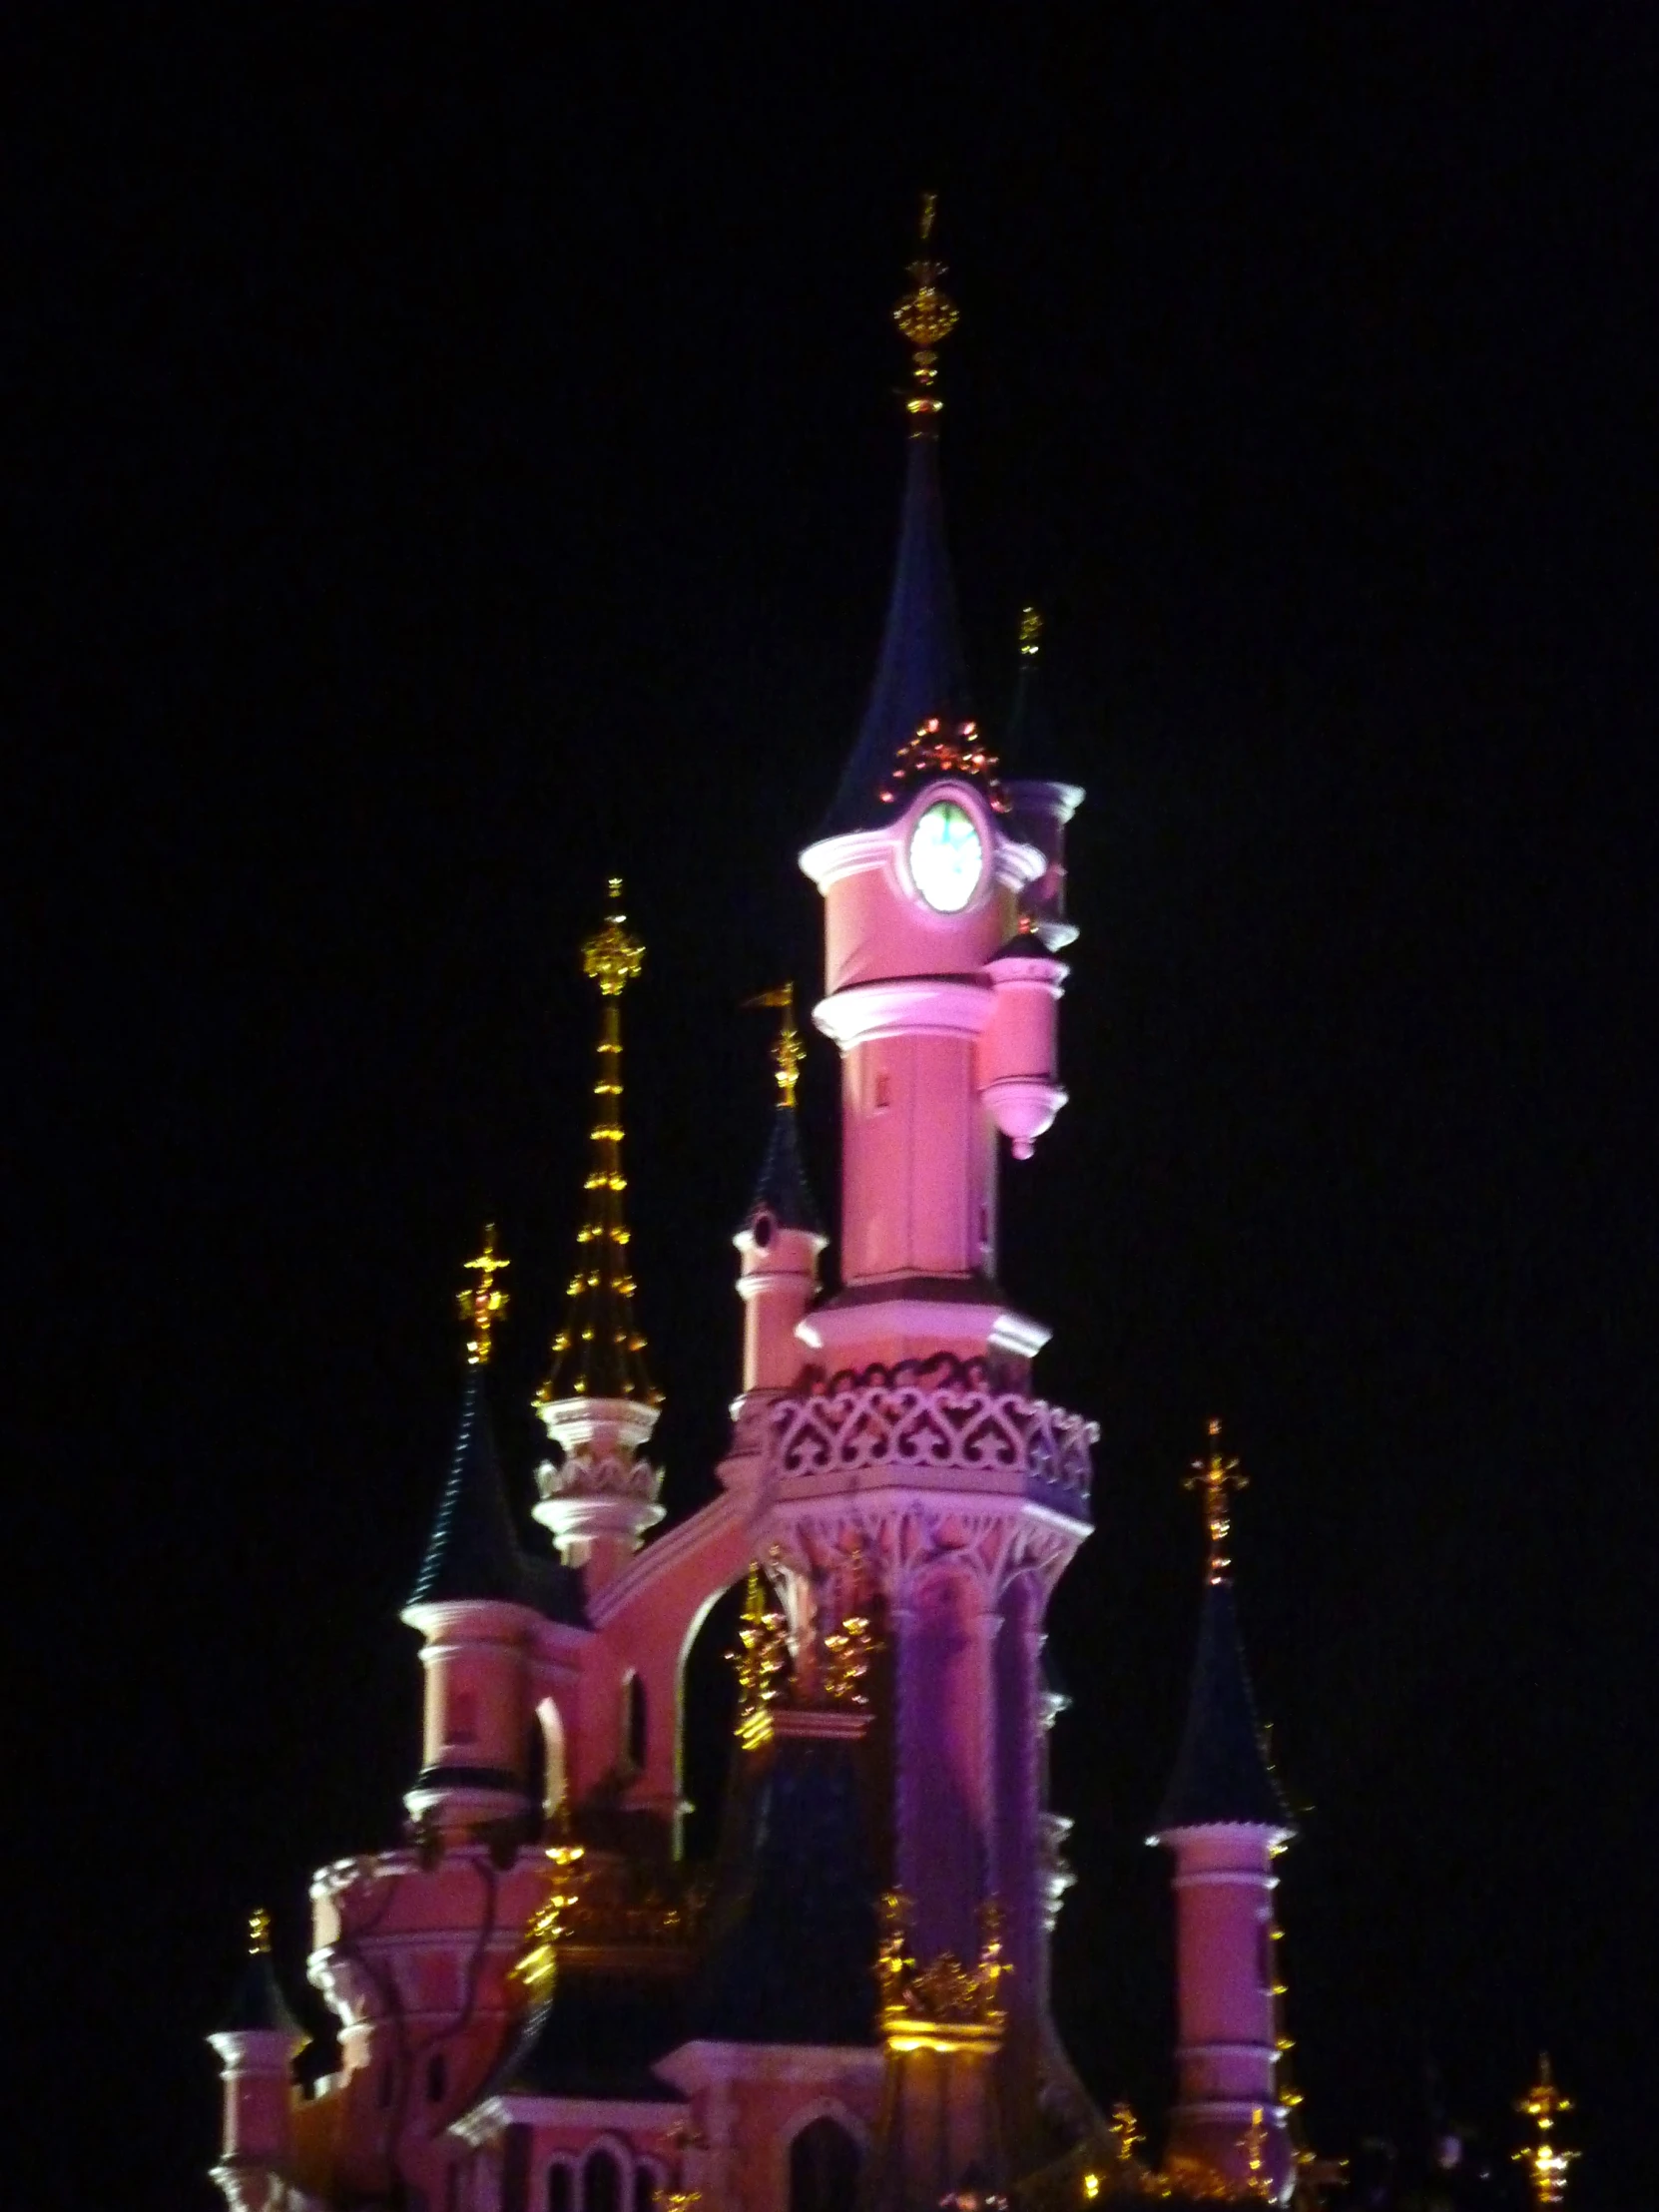 a castle at night with an analog clock